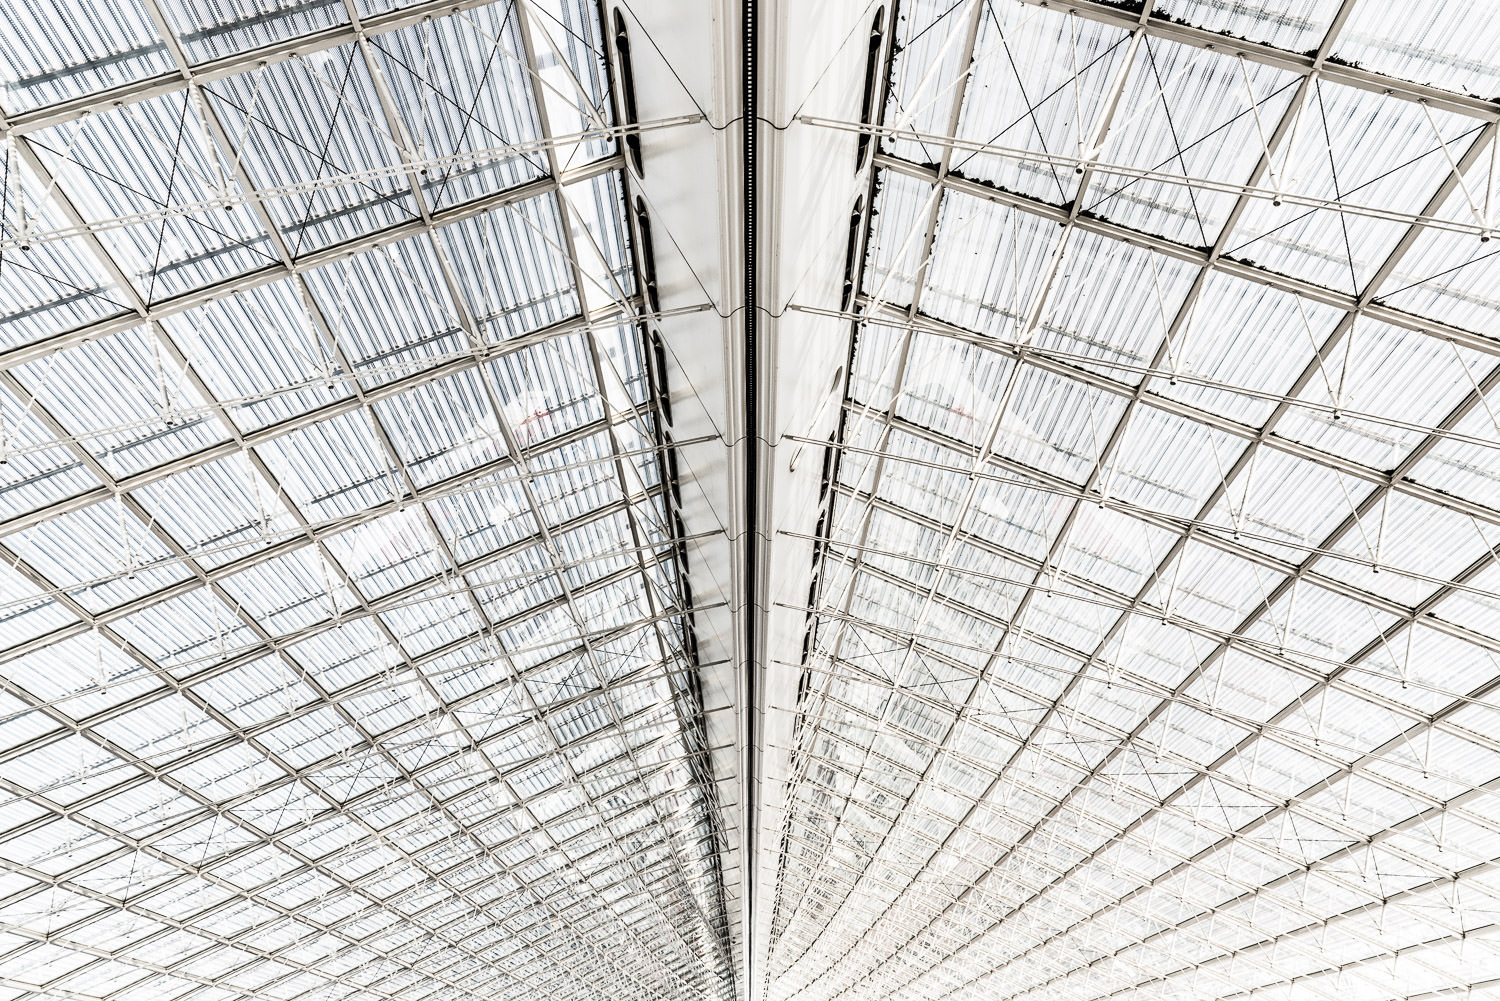 Converging Glass - CDG, Charles de Gaulle, Europe, France, Paris, Terminal 2F, airport, glass, roof, symmetry, travel